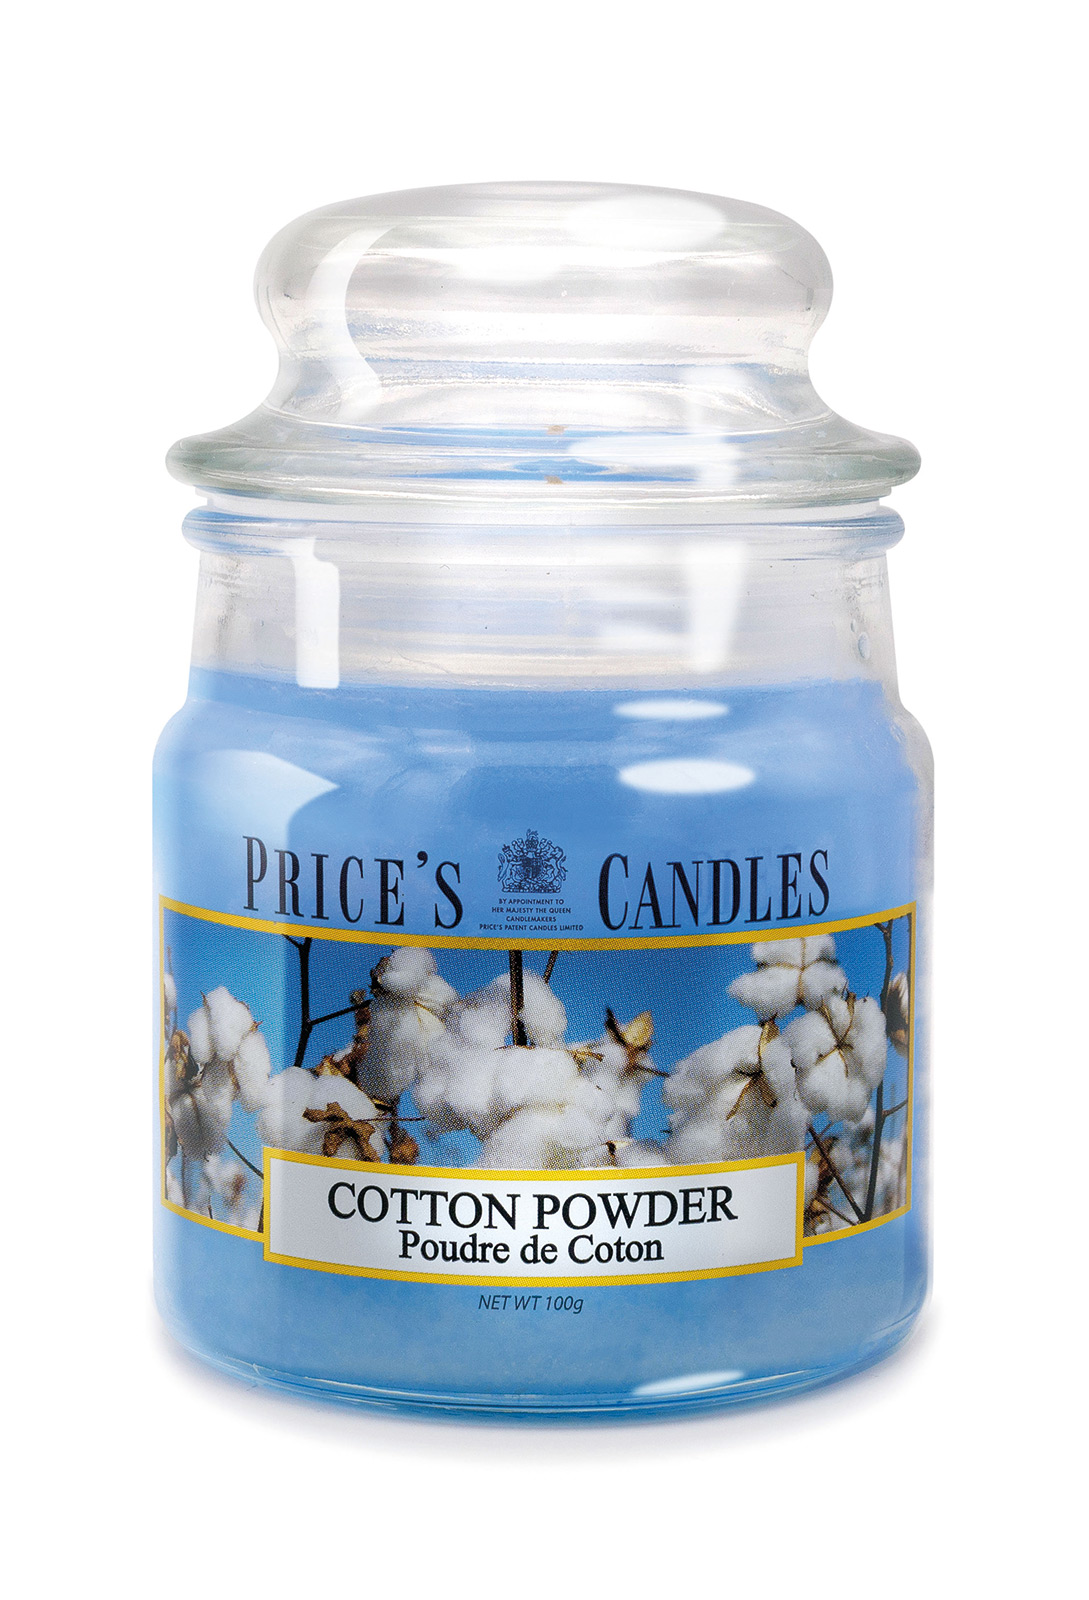 Prices Candle "Cotton Powder" 100g 